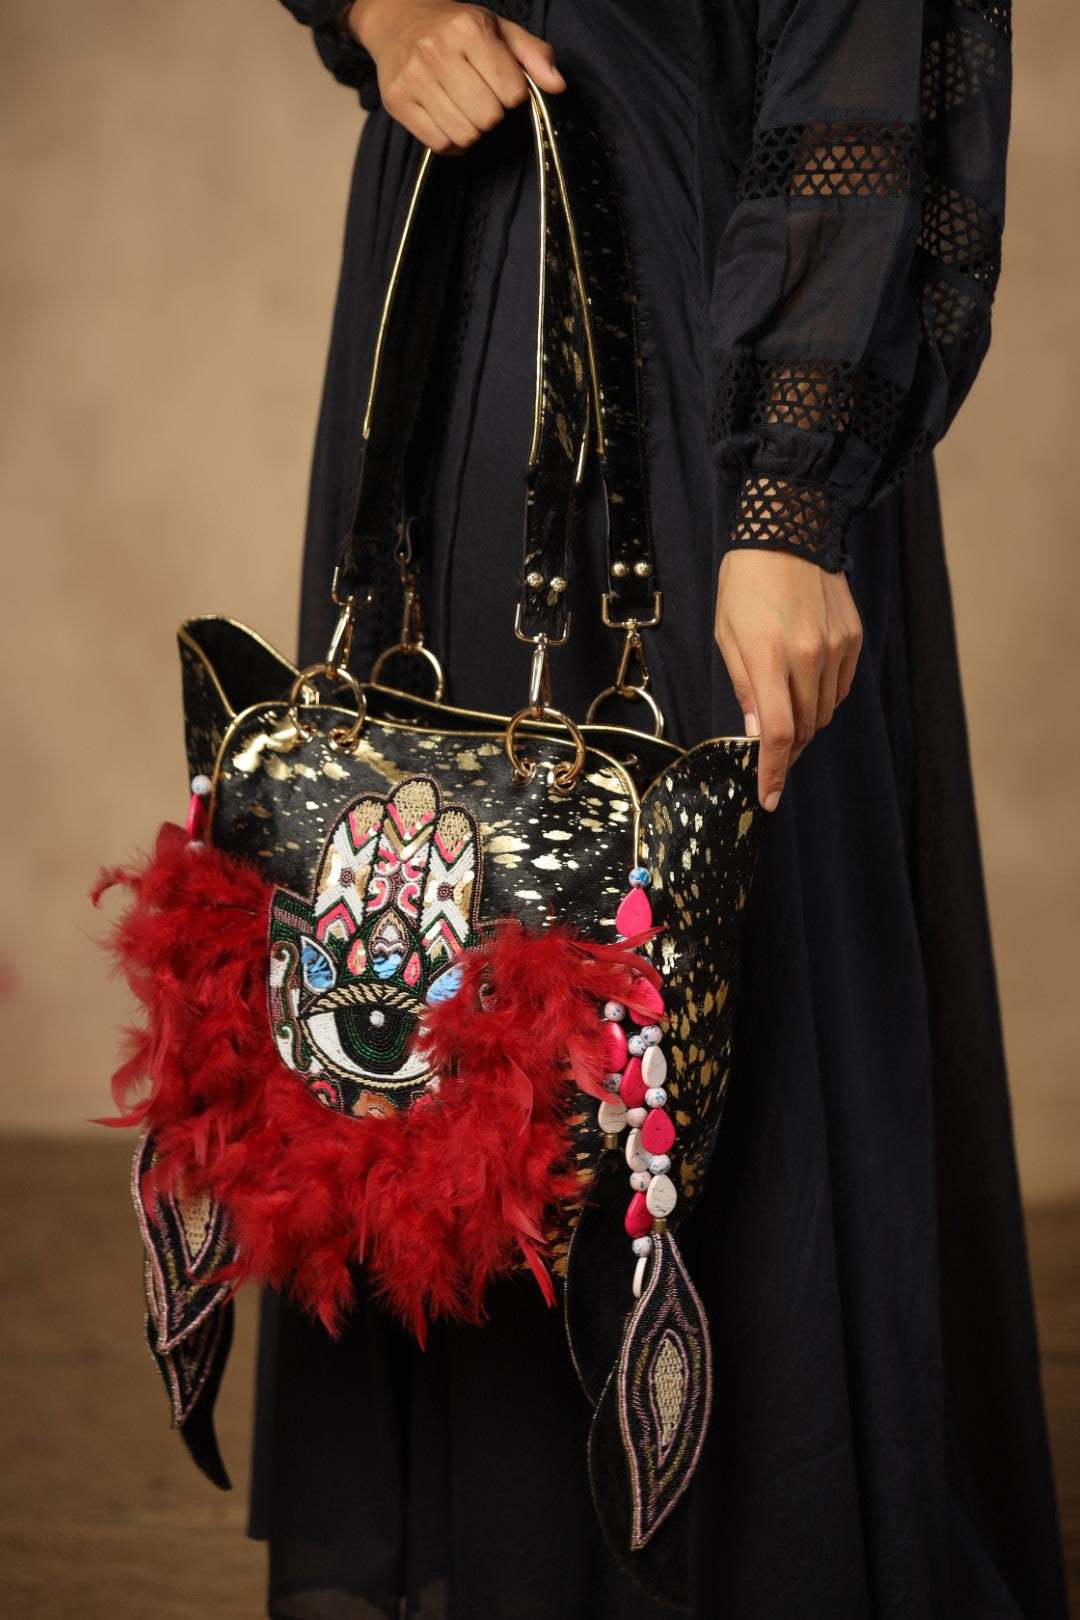 Women Handmade Leather Shoulder Bag With Red Feather Fringes